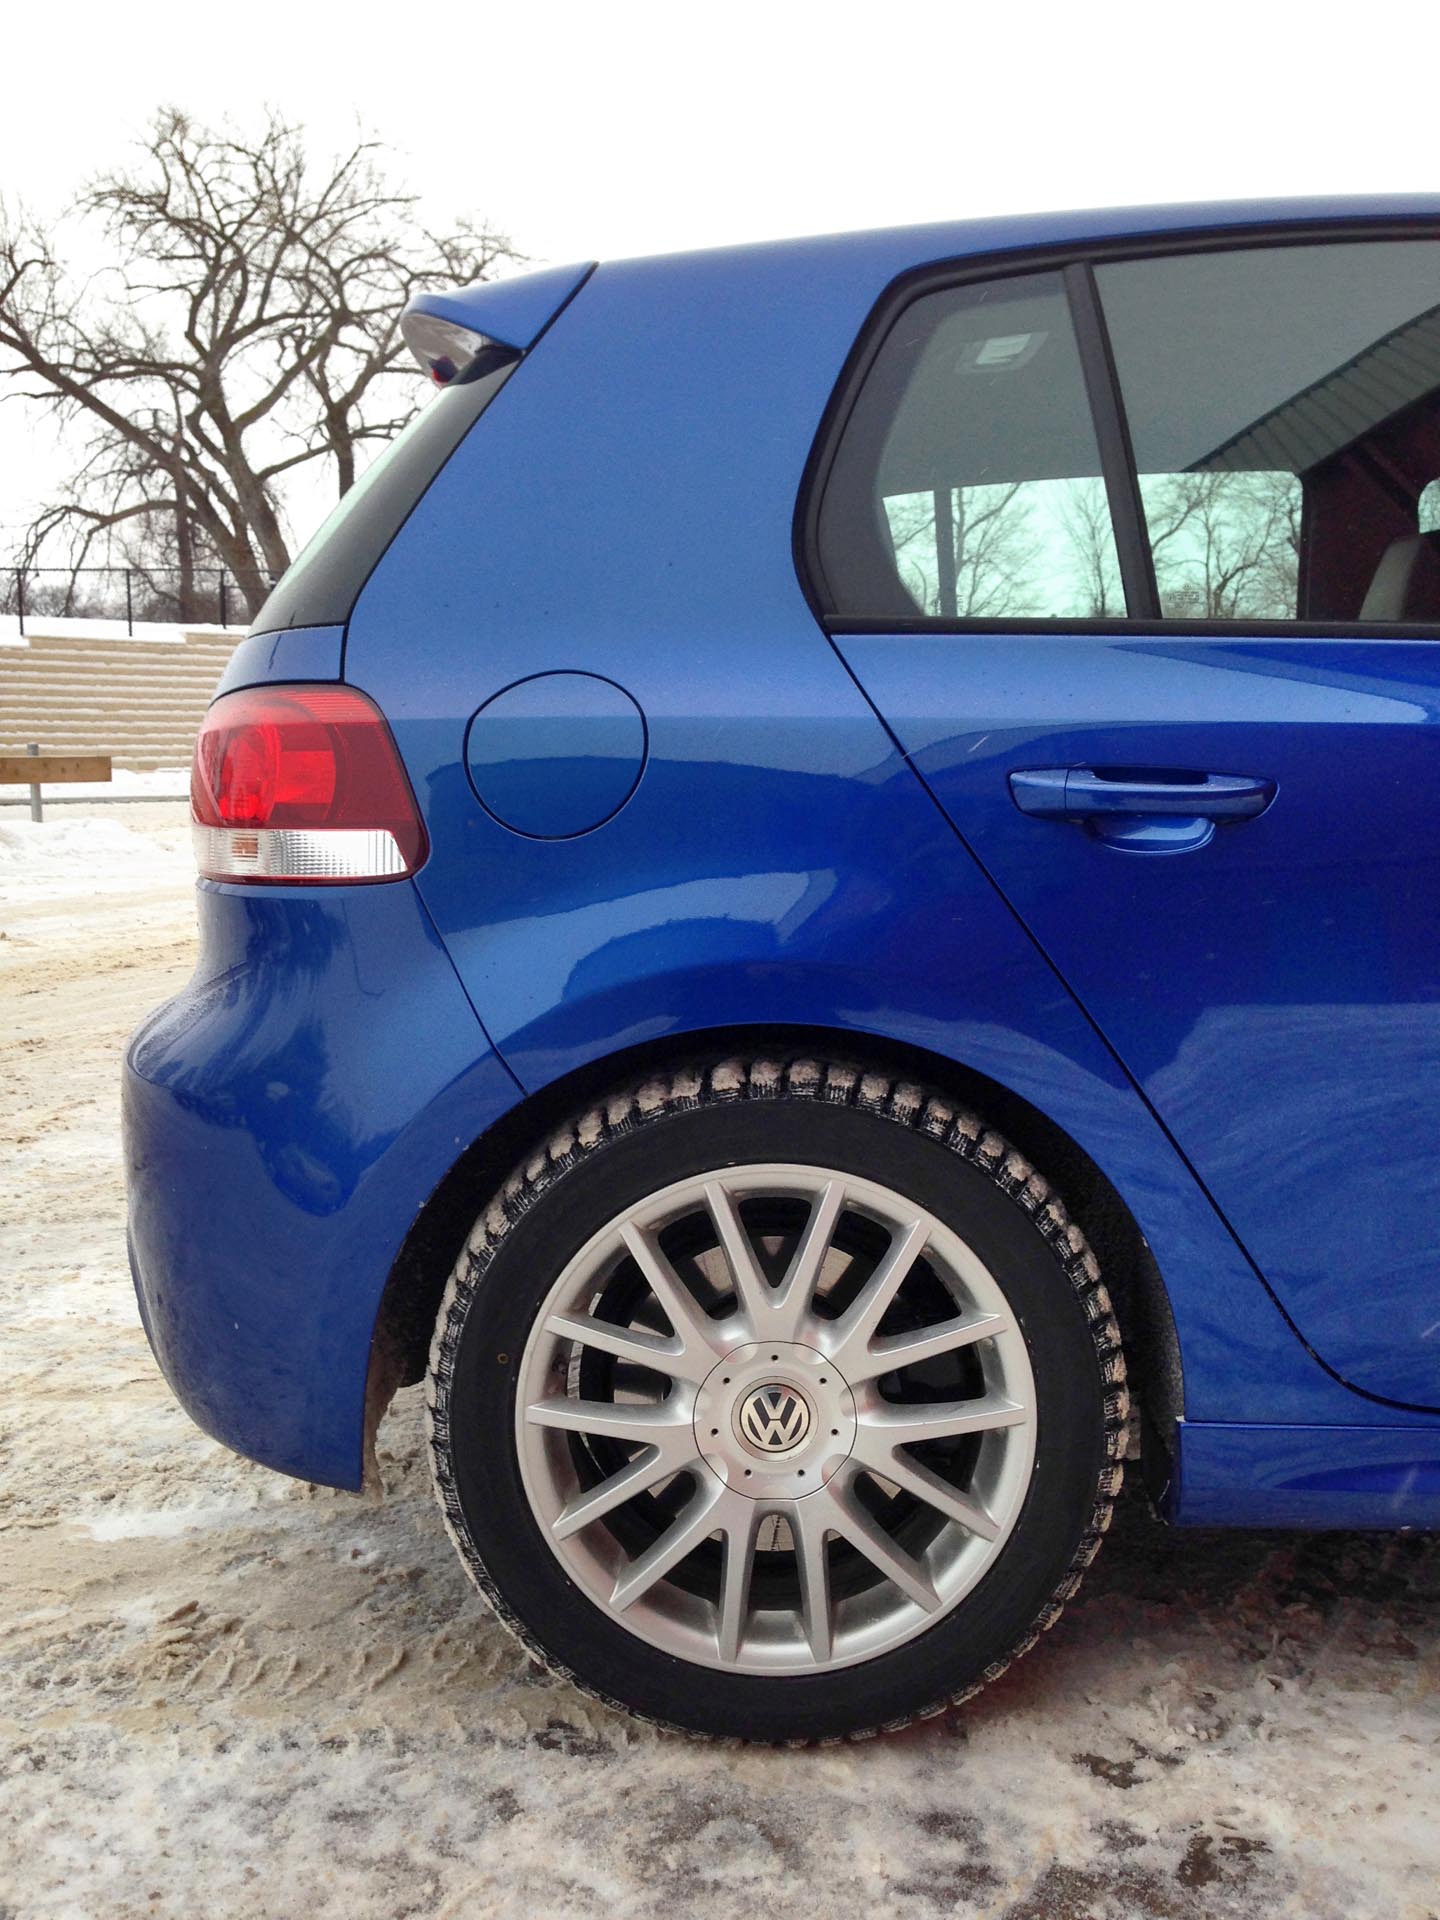 | of Winter Page Autos.ca Review: 3 Tire - Observe G3-Ice 3 Toyo Page - 3